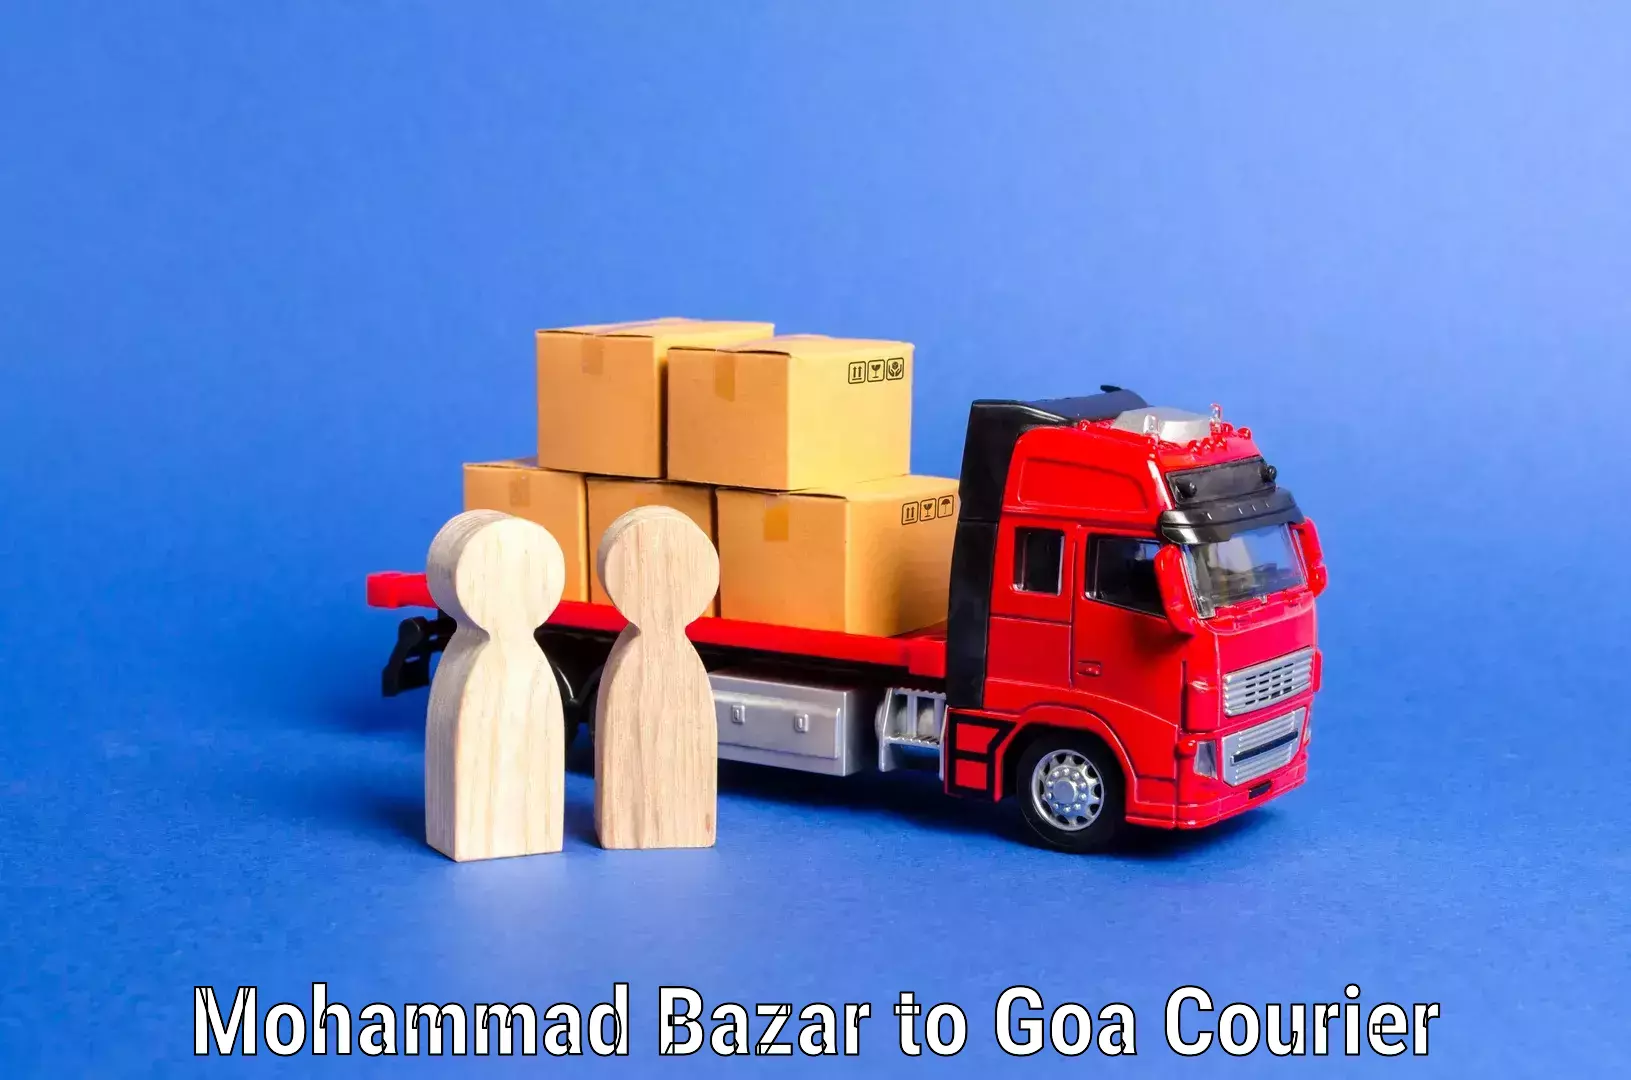 Furniture delivery service Mohammad Bazar to Goa